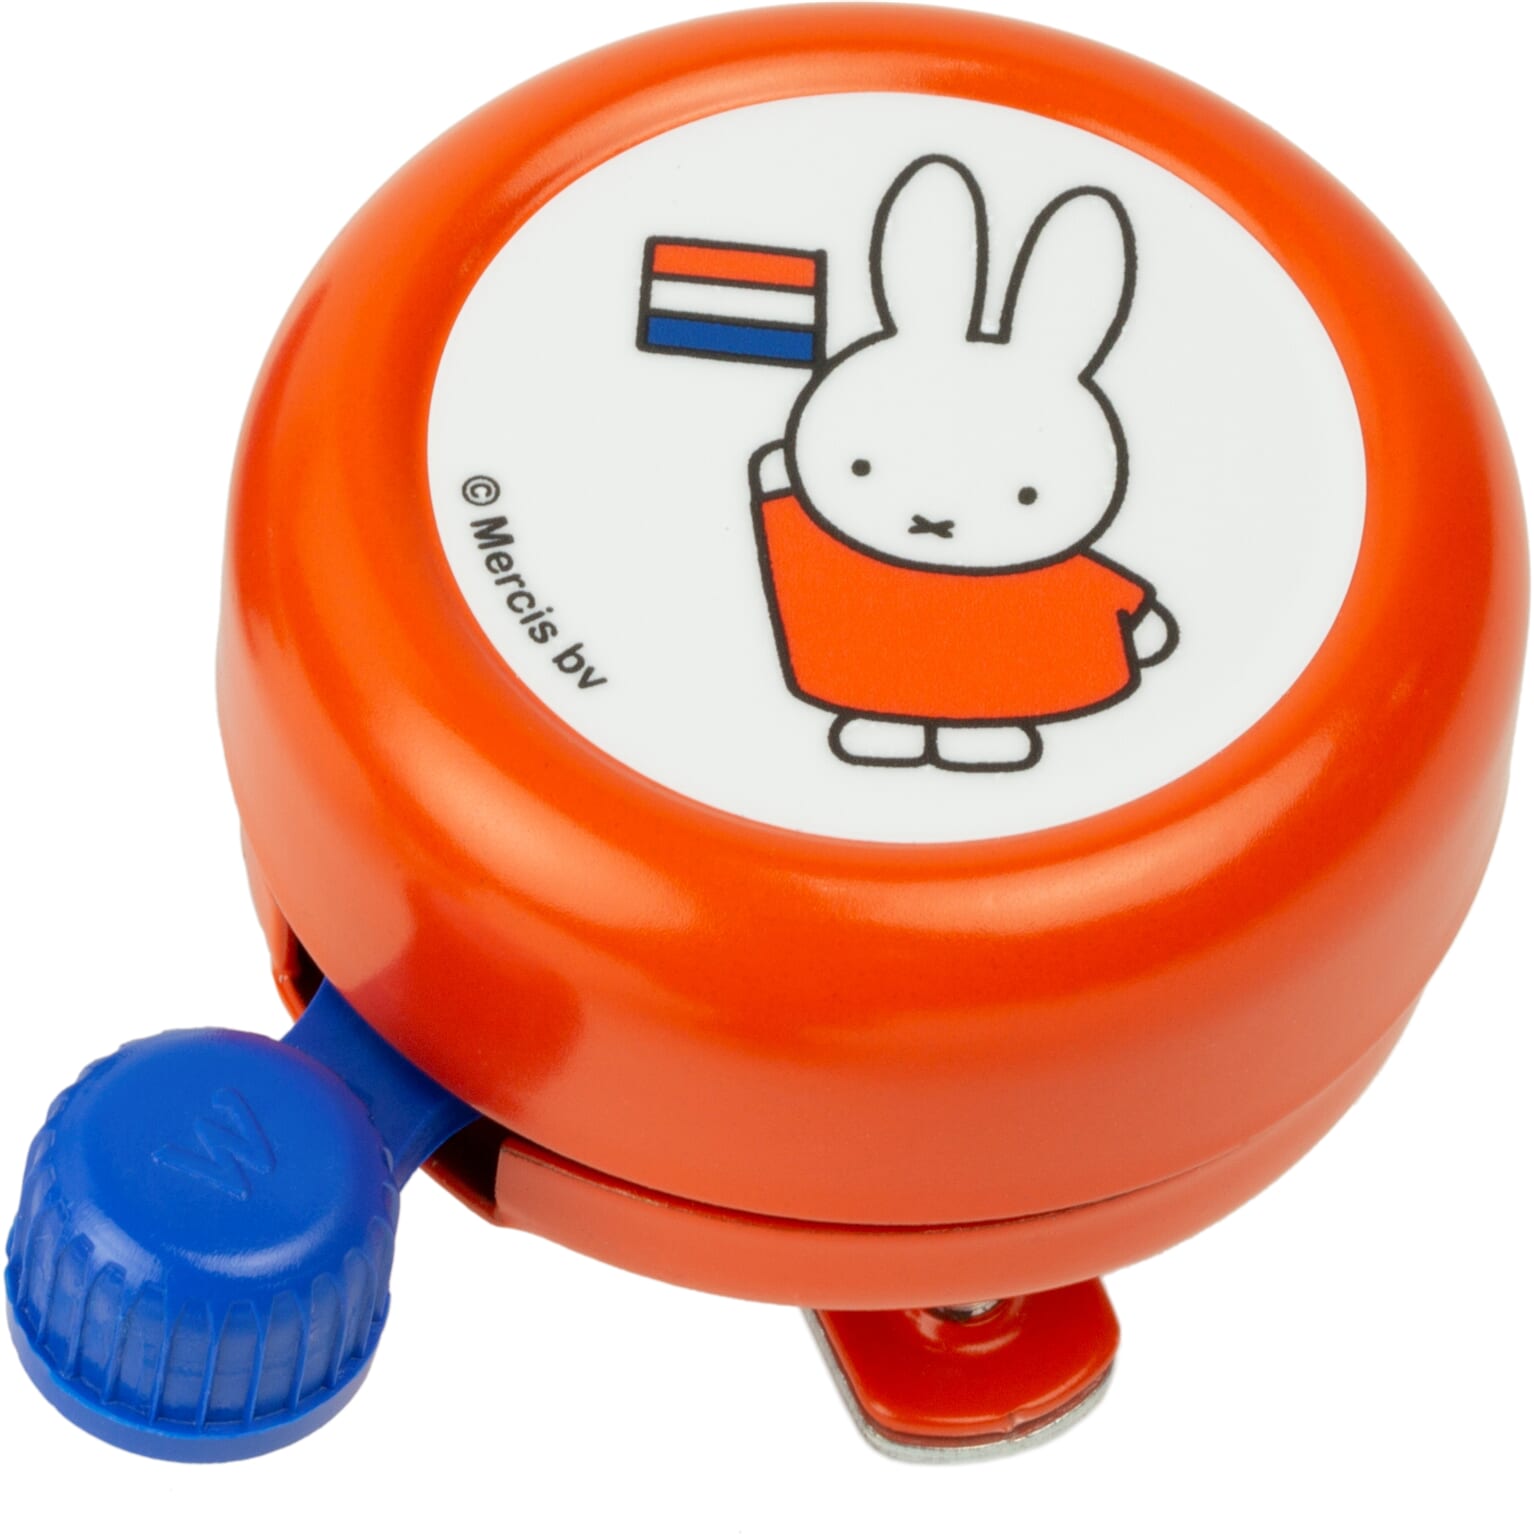 Widek bell Miffy "orange with flag" (on map)